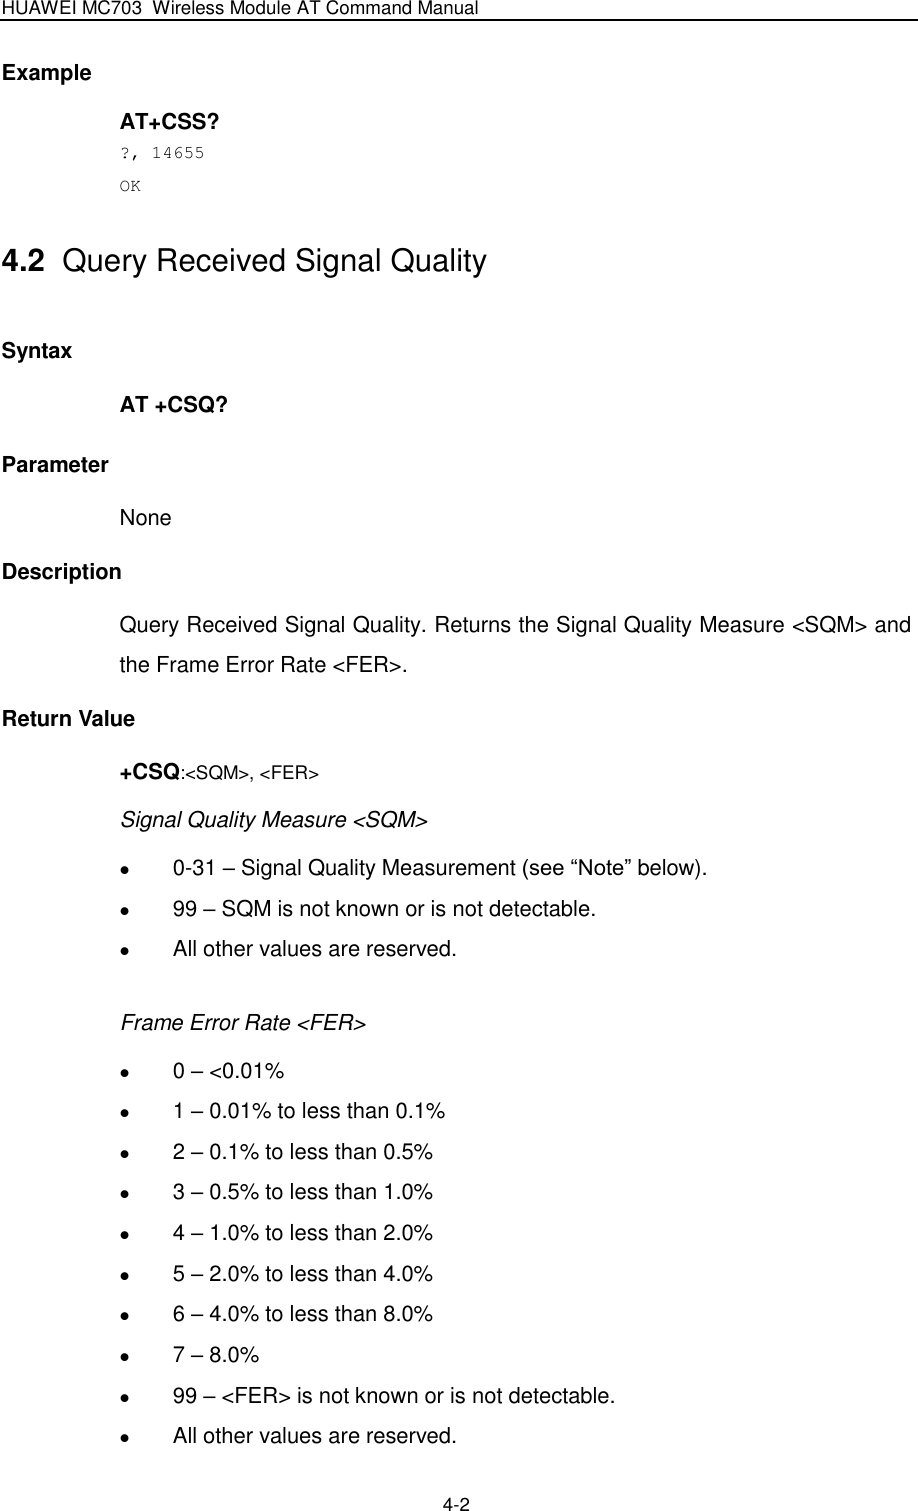 HUAWEI MC703 Wireless Module AT Command Manual   4-2 Example AT+CSS? ?, 14655 OK 4.2  Query Received Signal Quality Syntax AT +CSQ? Parameter None Description Query Received Signal Quality. Returns the Signal Quality Measure &lt;SQM&gt; and the Frame Error Rate &lt;FER&gt;. Return Value +CSQ:&lt;SQM&gt;, &lt;FER&gt; Signal Quality Measure &lt;SQM&gt;  0-31 – Signal Quality Measurement (see “Note” below).  99 – SQM is not known or is not detectable.  All other values are reserved.  Frame Error Rate &lt;FER&gt;  0 – &lt;0.01%  1 – 0.01% to less than 0.1%  2 – 0.1% to less than 0.5%  3 – 0.5% to less than 1.0%  4 – 1.0% to less than 2.0%  5 – 2.0% to less than 4.0%  6 – 4.0% to less than 8.0%  7 – 8.0%  99 – &lt;FER&gt; is not known or is not detectable.  All other values are reserved. 